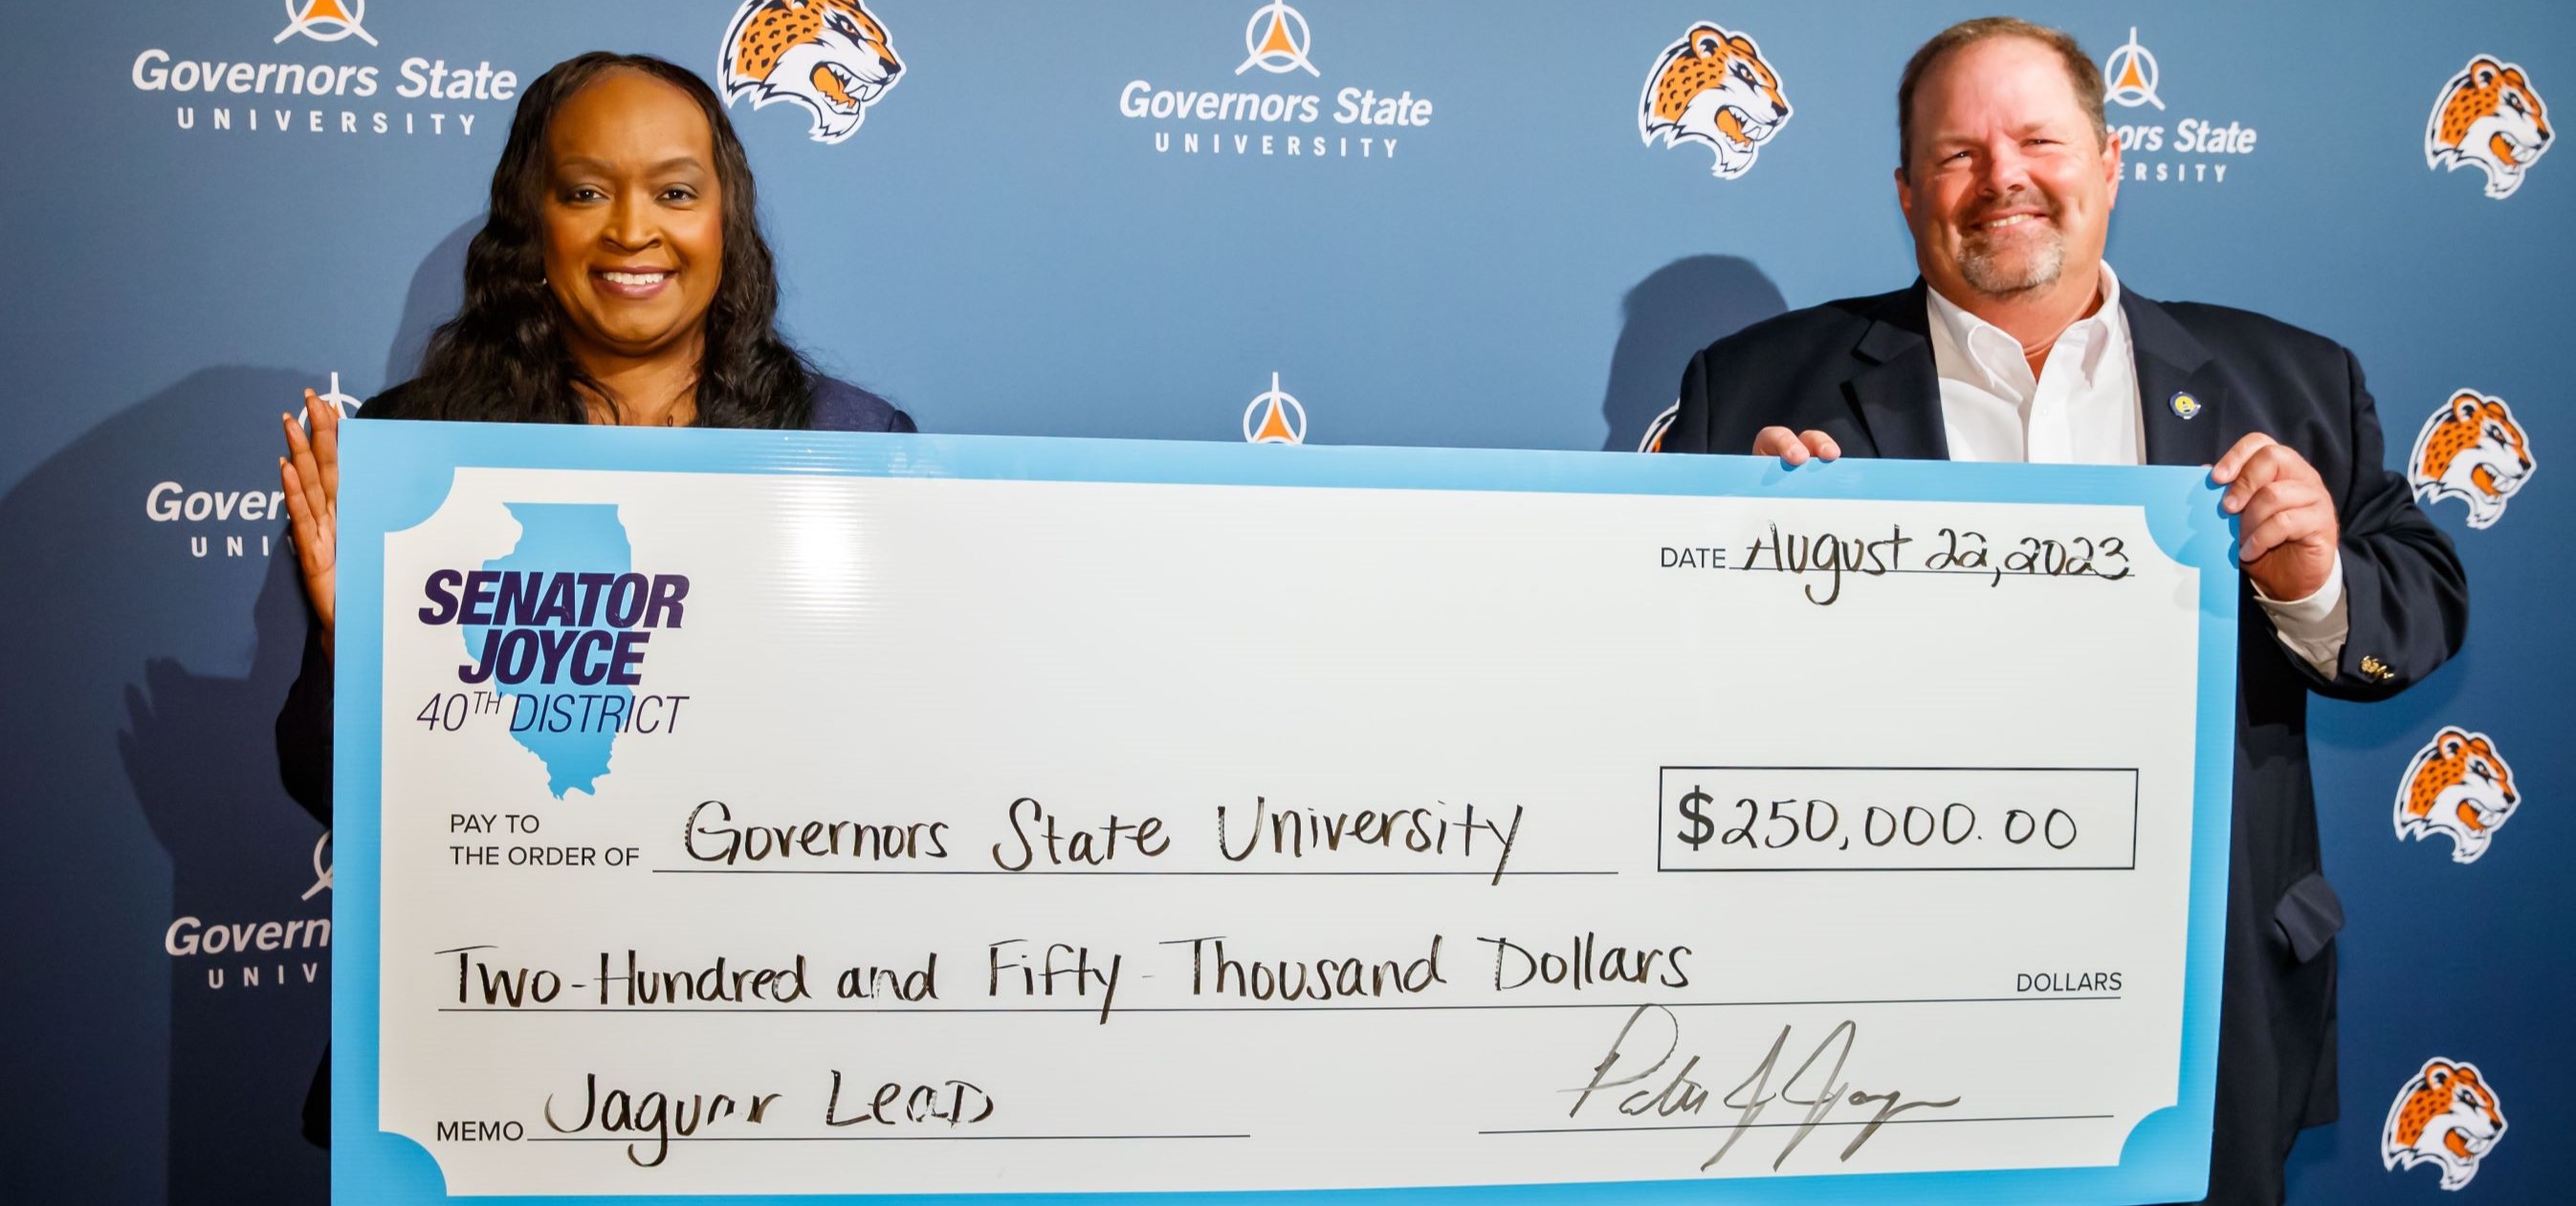 President Green and Patrick Joyce holding giant check